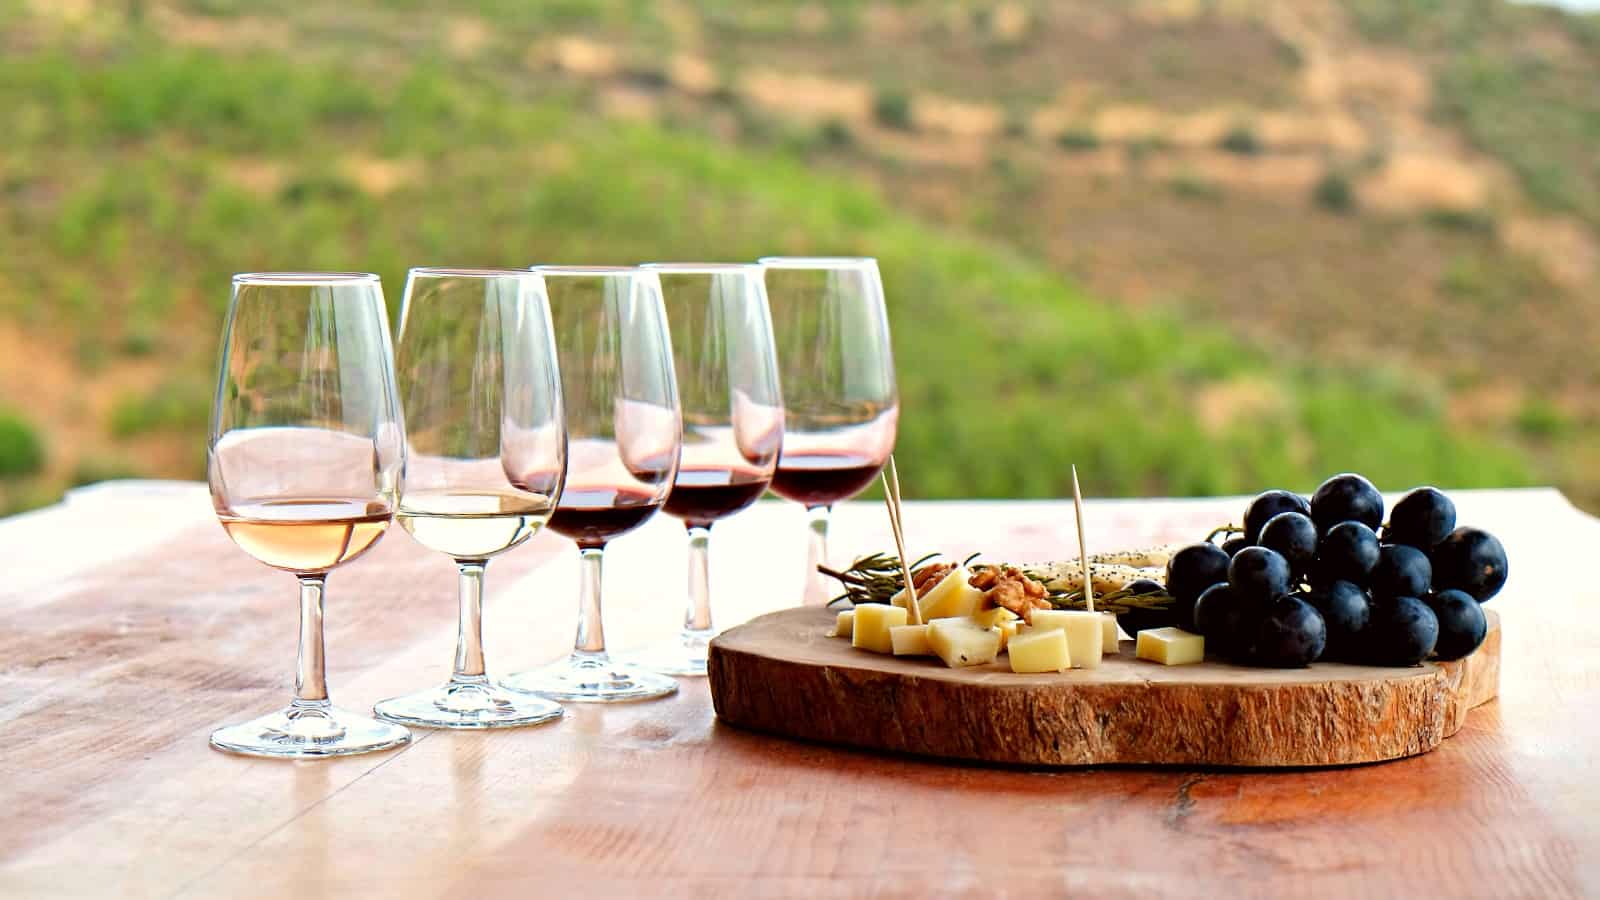 Close-up of five glasses with different types of red and white wine, a wooden plate full of cheese and grapes on a wooden table with a picturesque background